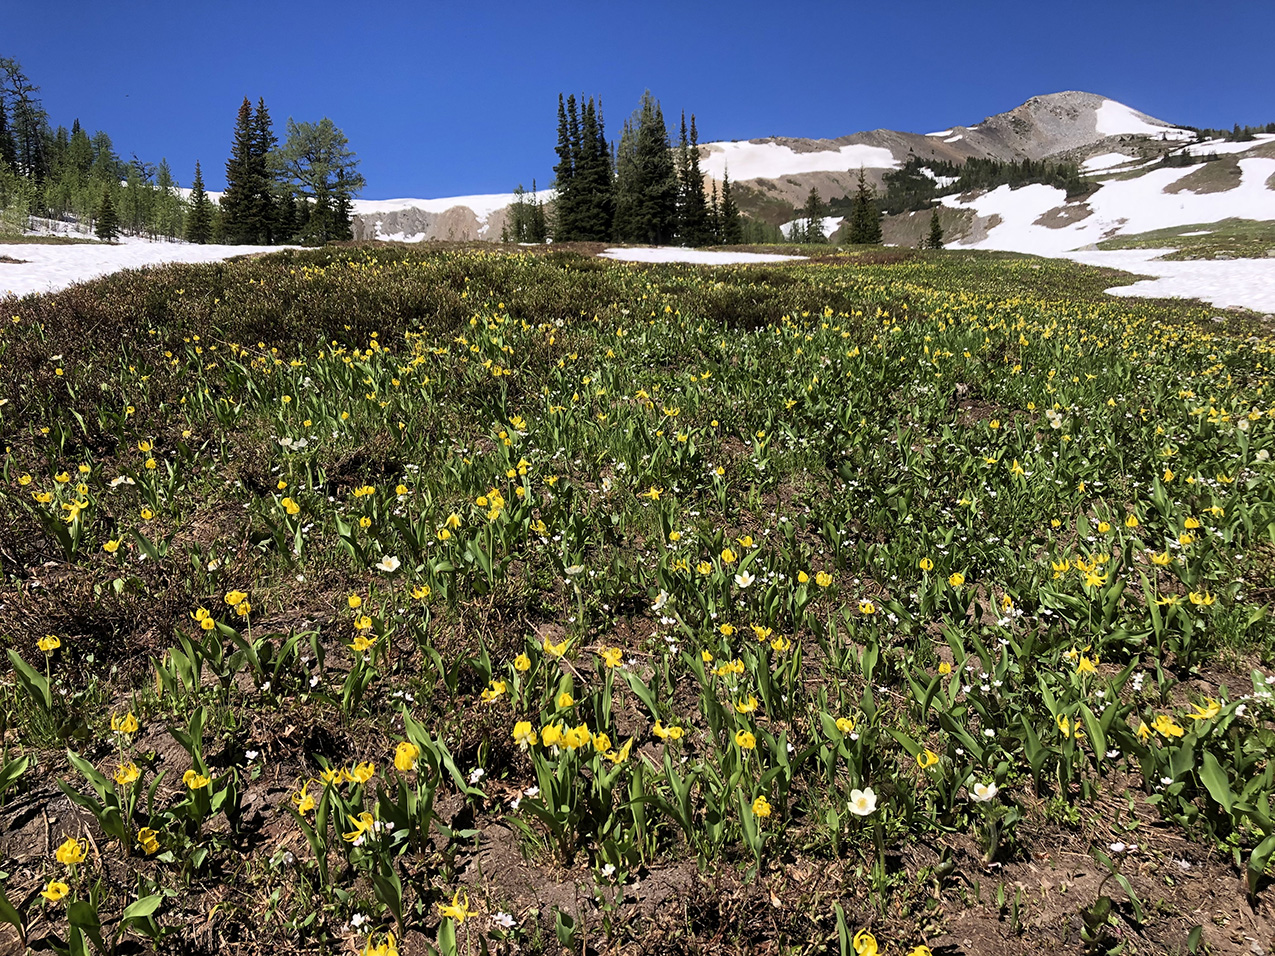 yellow and white spring flowers are prolific in a sunny field in the North Cascades; remnants of snow dot the landscape in the background